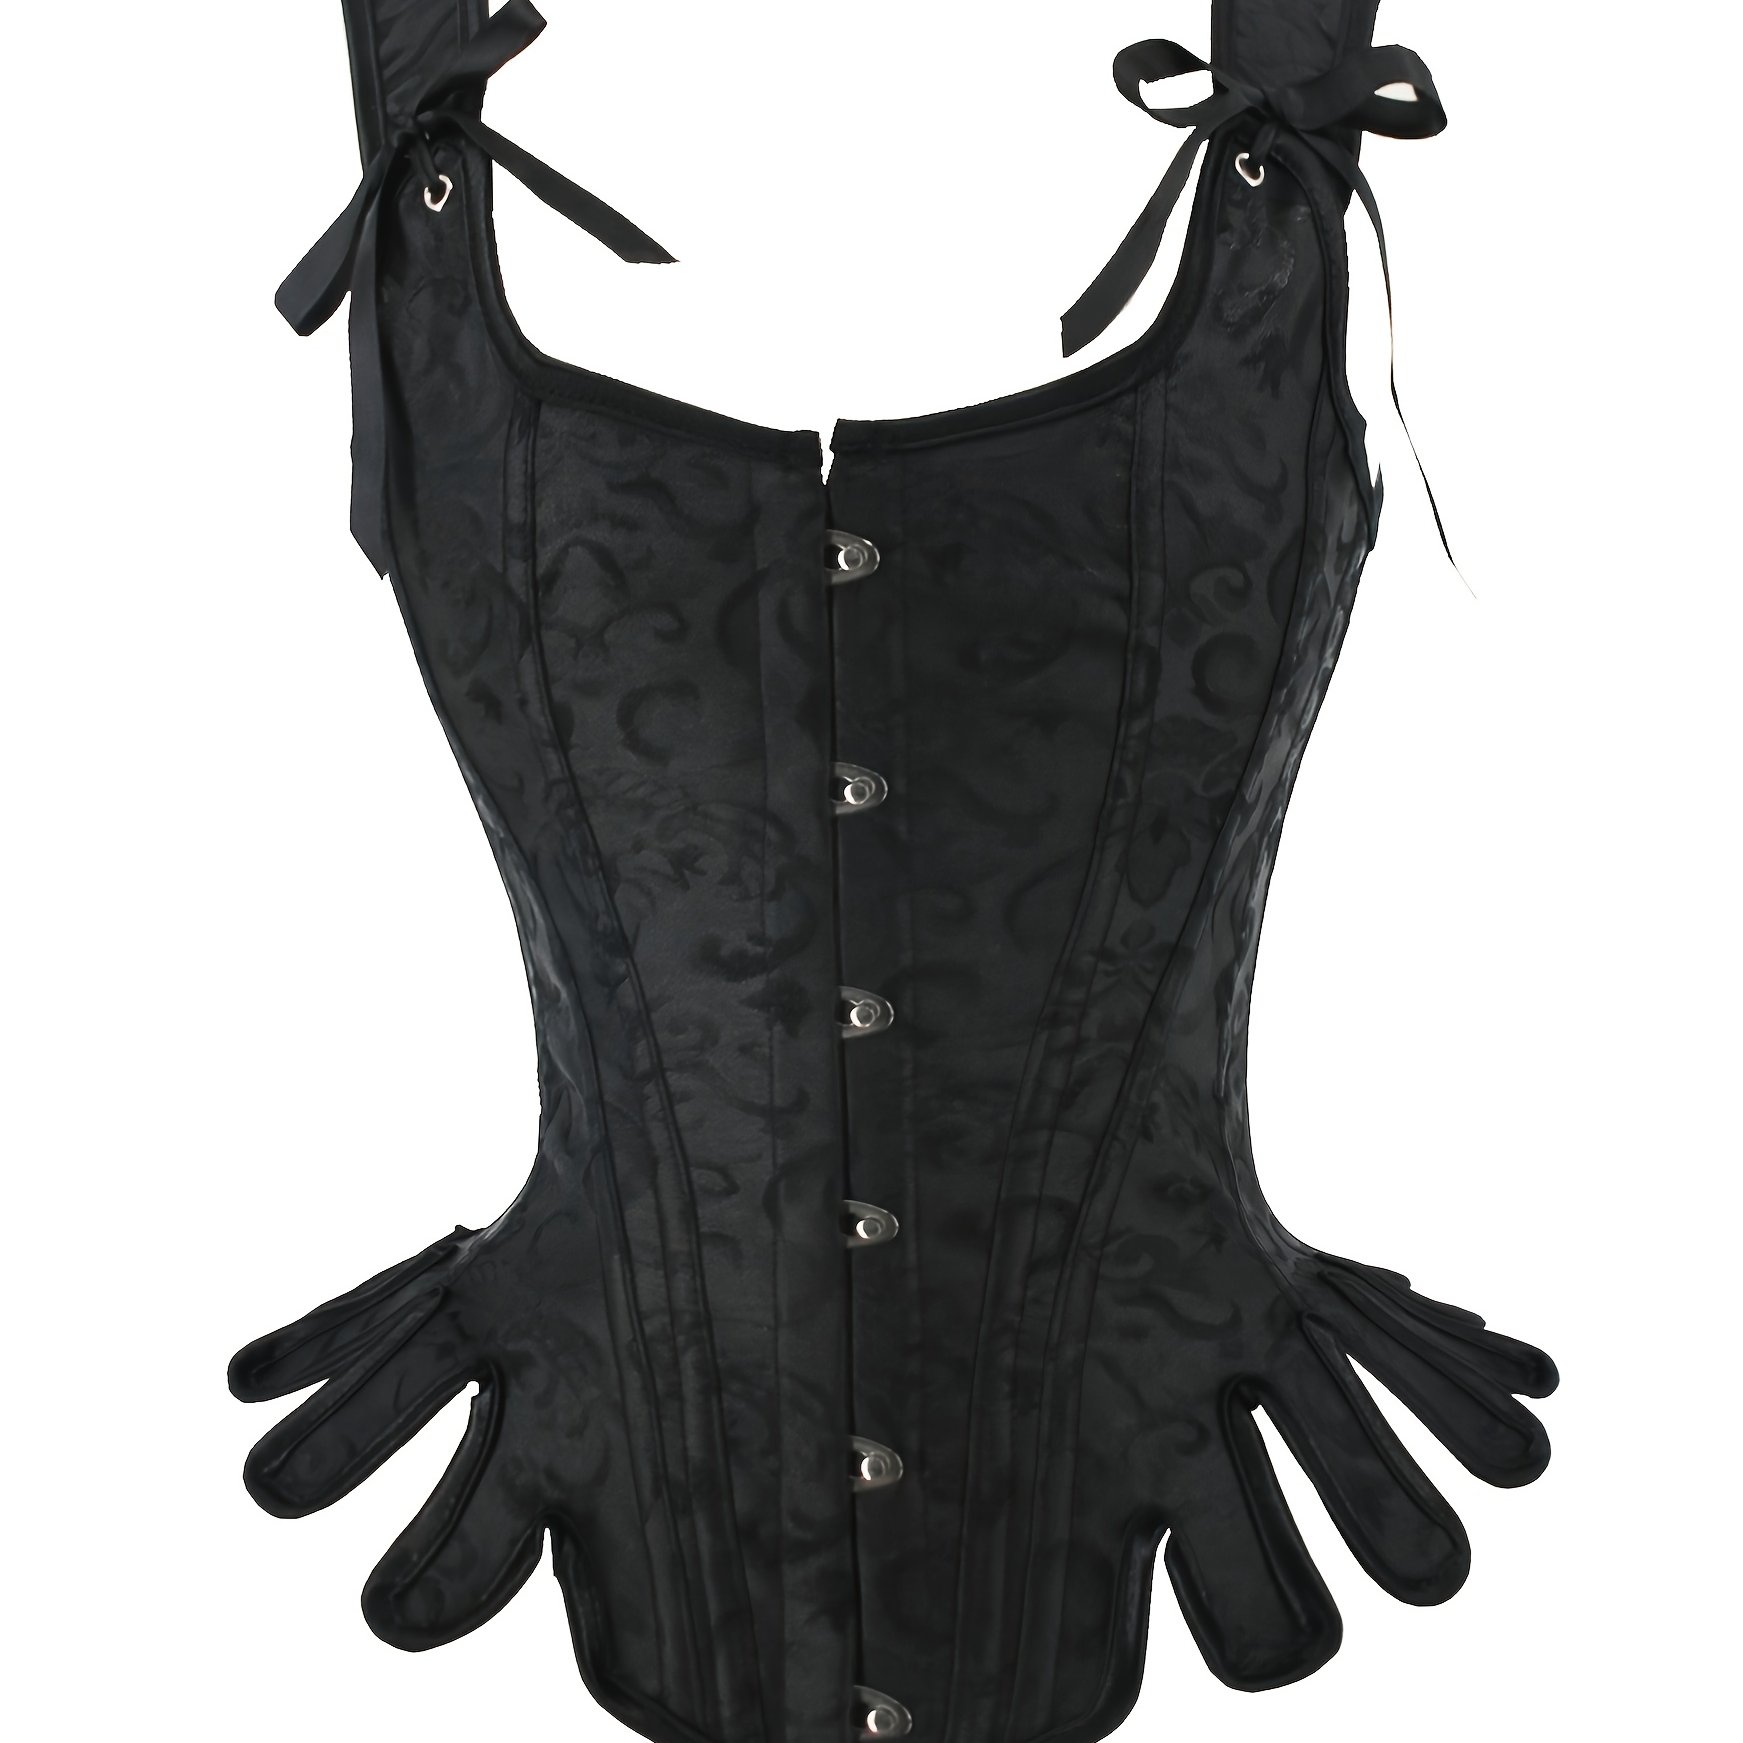 2022 New Vintage Corset Bustier Tops For Women Lace Up Bandage